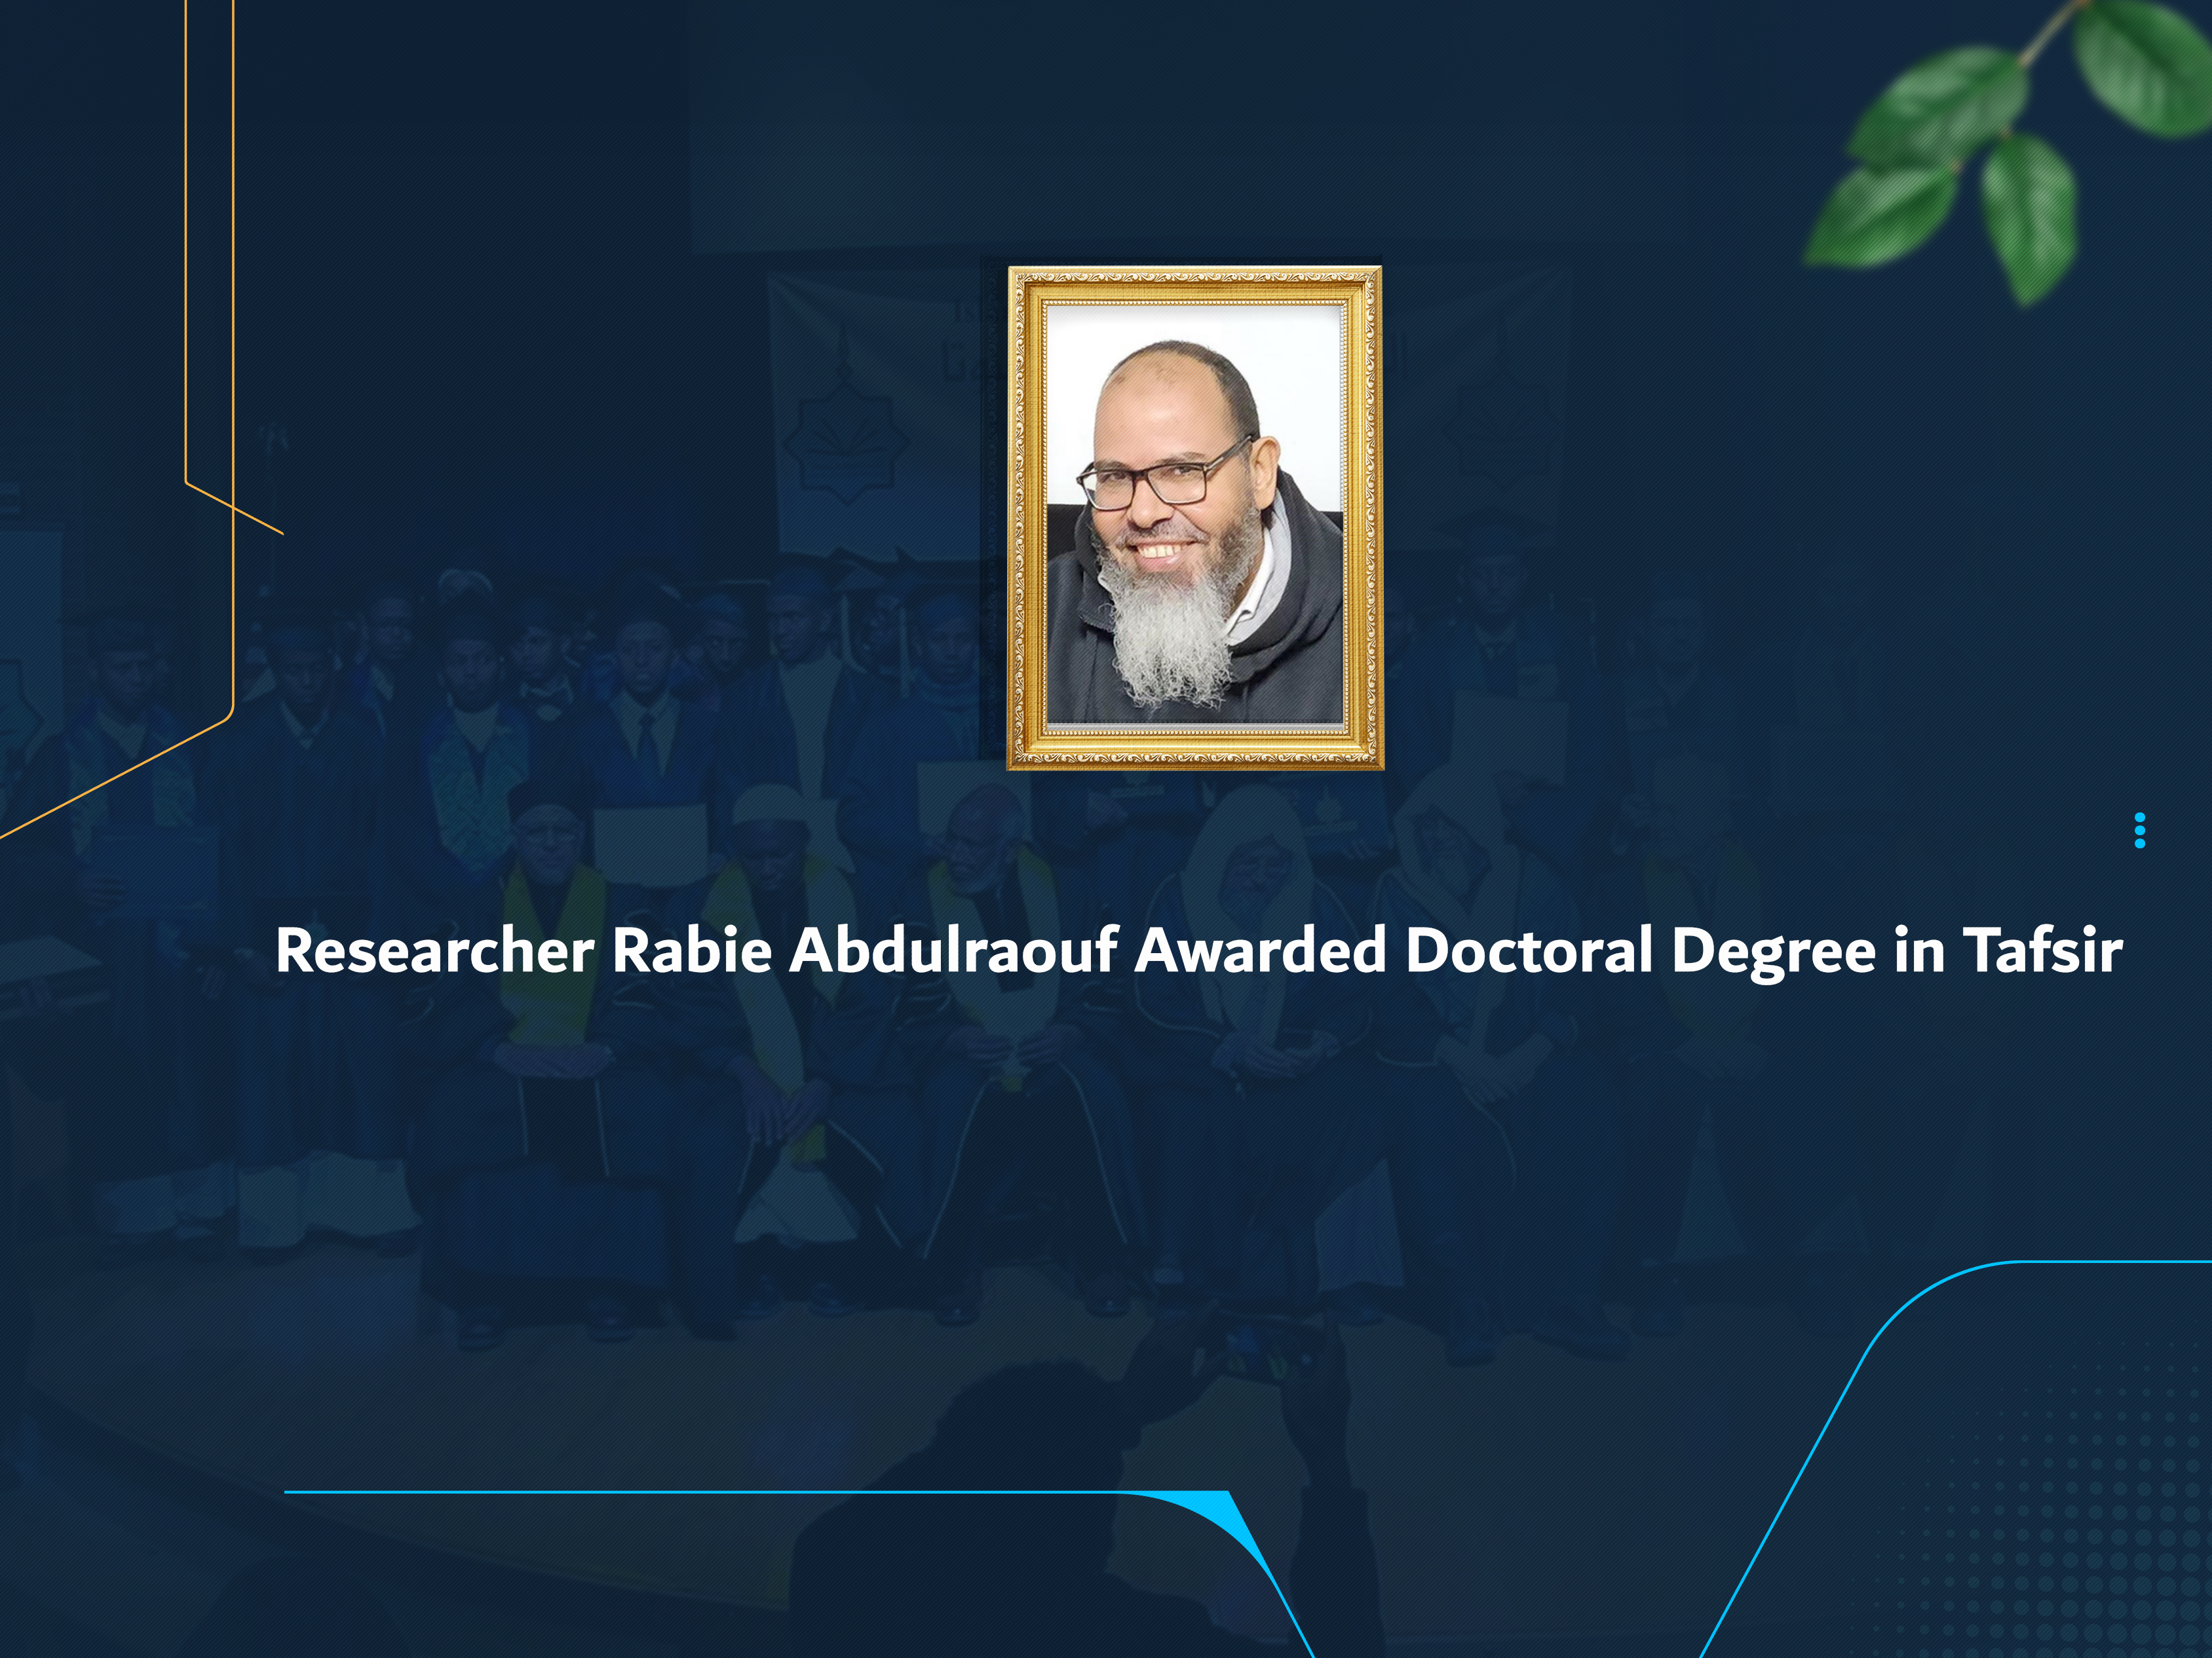 Researcher Rabie Abdulraouf Awarded Doctoral Degree in Tafsir